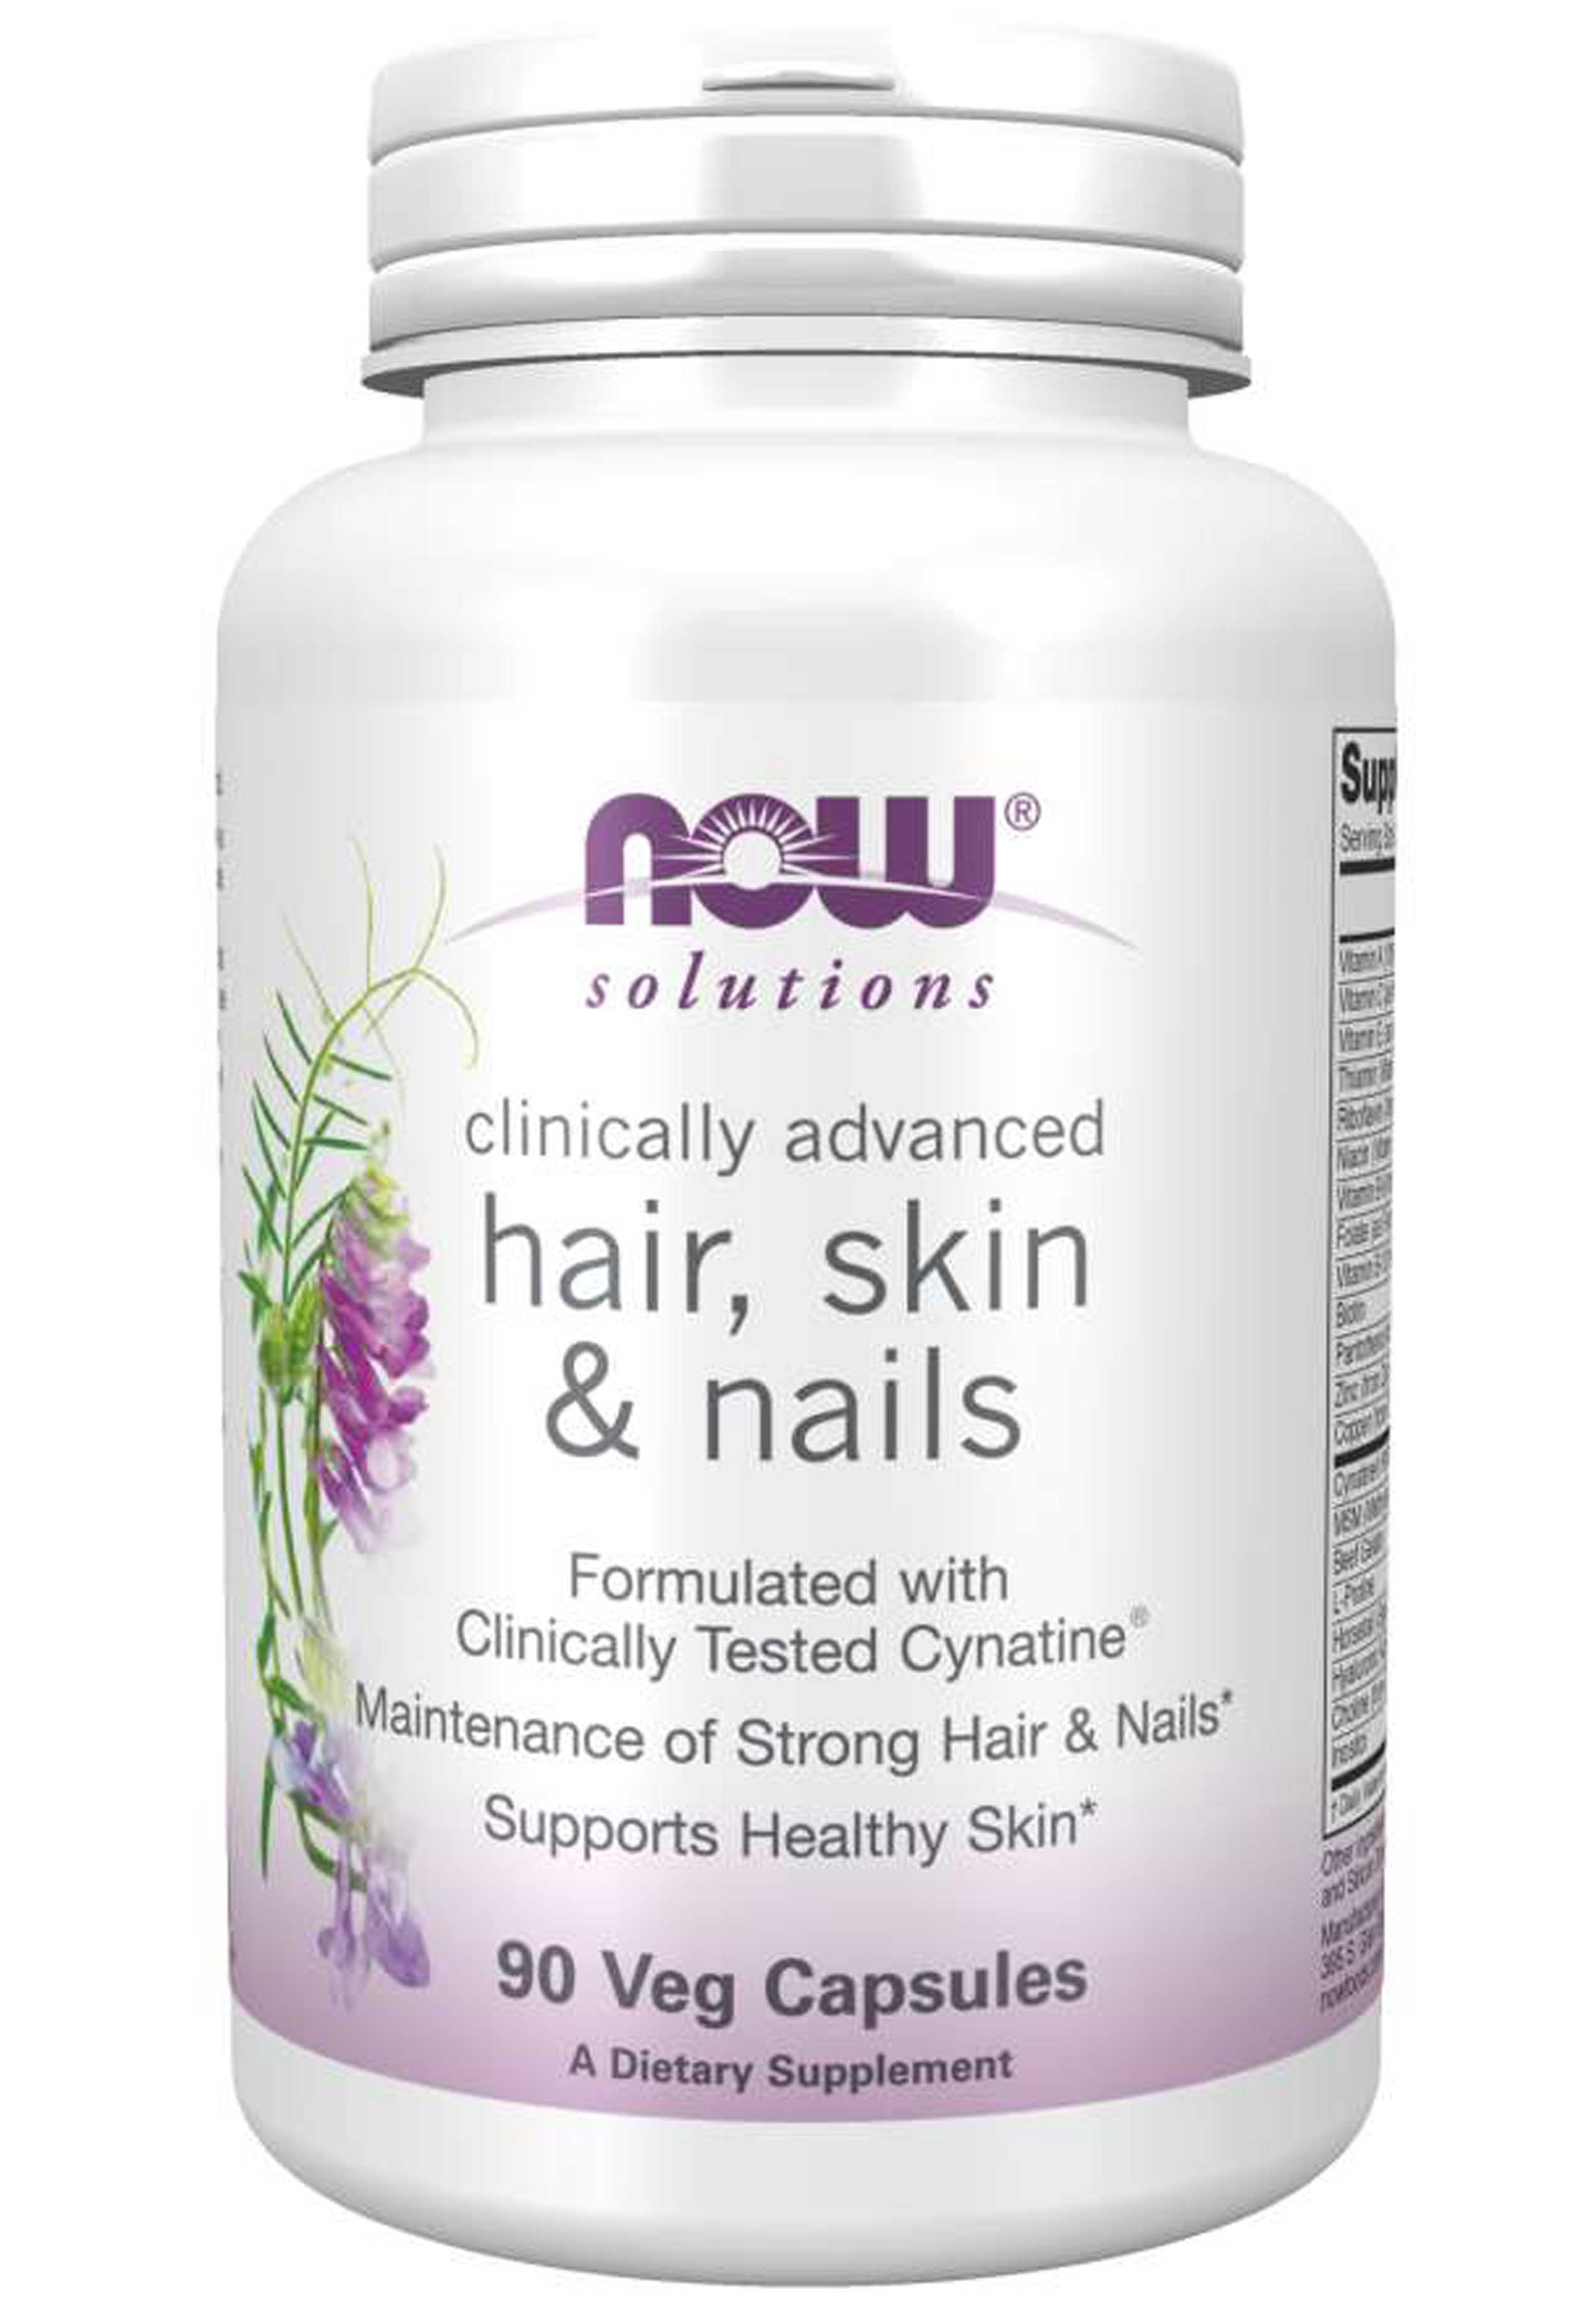 NOW Solutions Hair, Skin & Nails